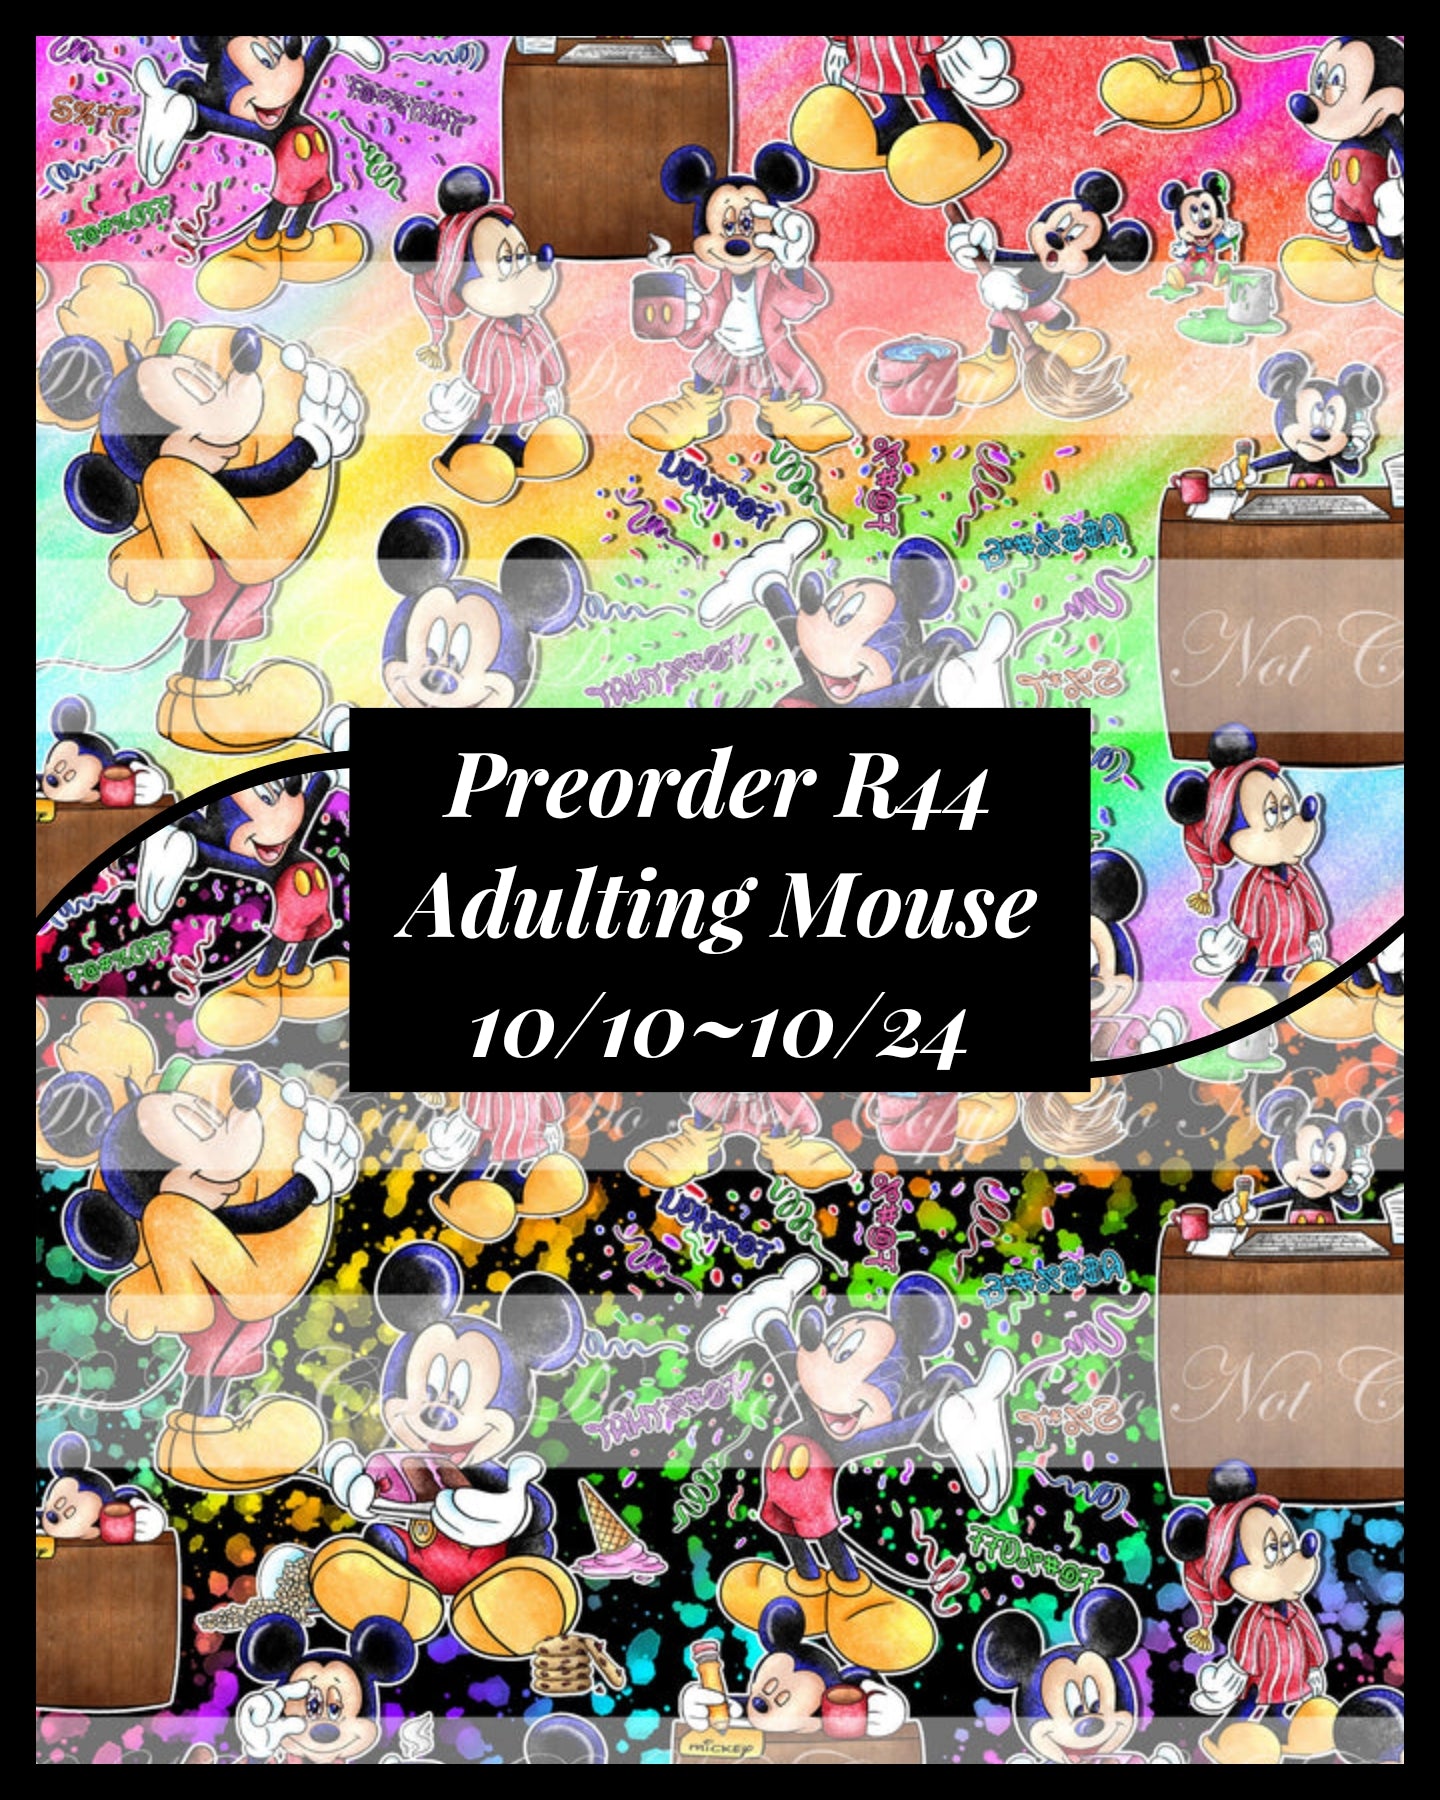 PREORDER R44 Adulting Mouse